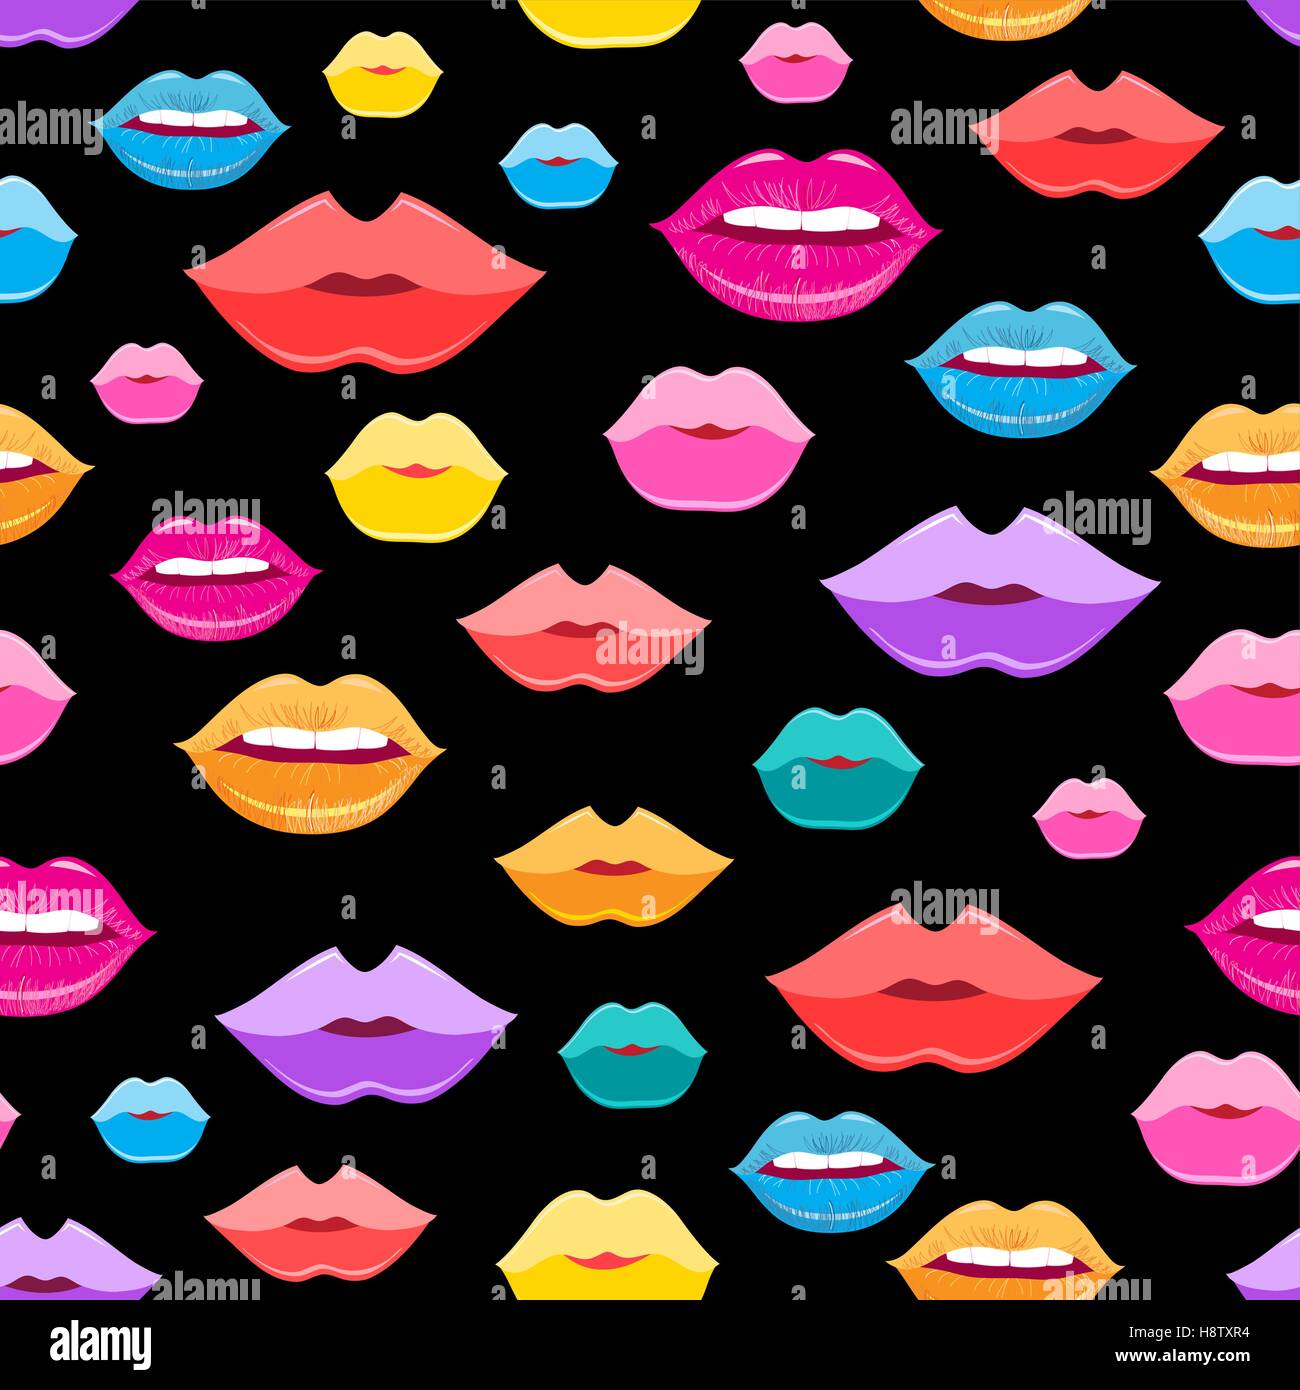 Bright vector pattern of colored lips on a dark background Stock Vector